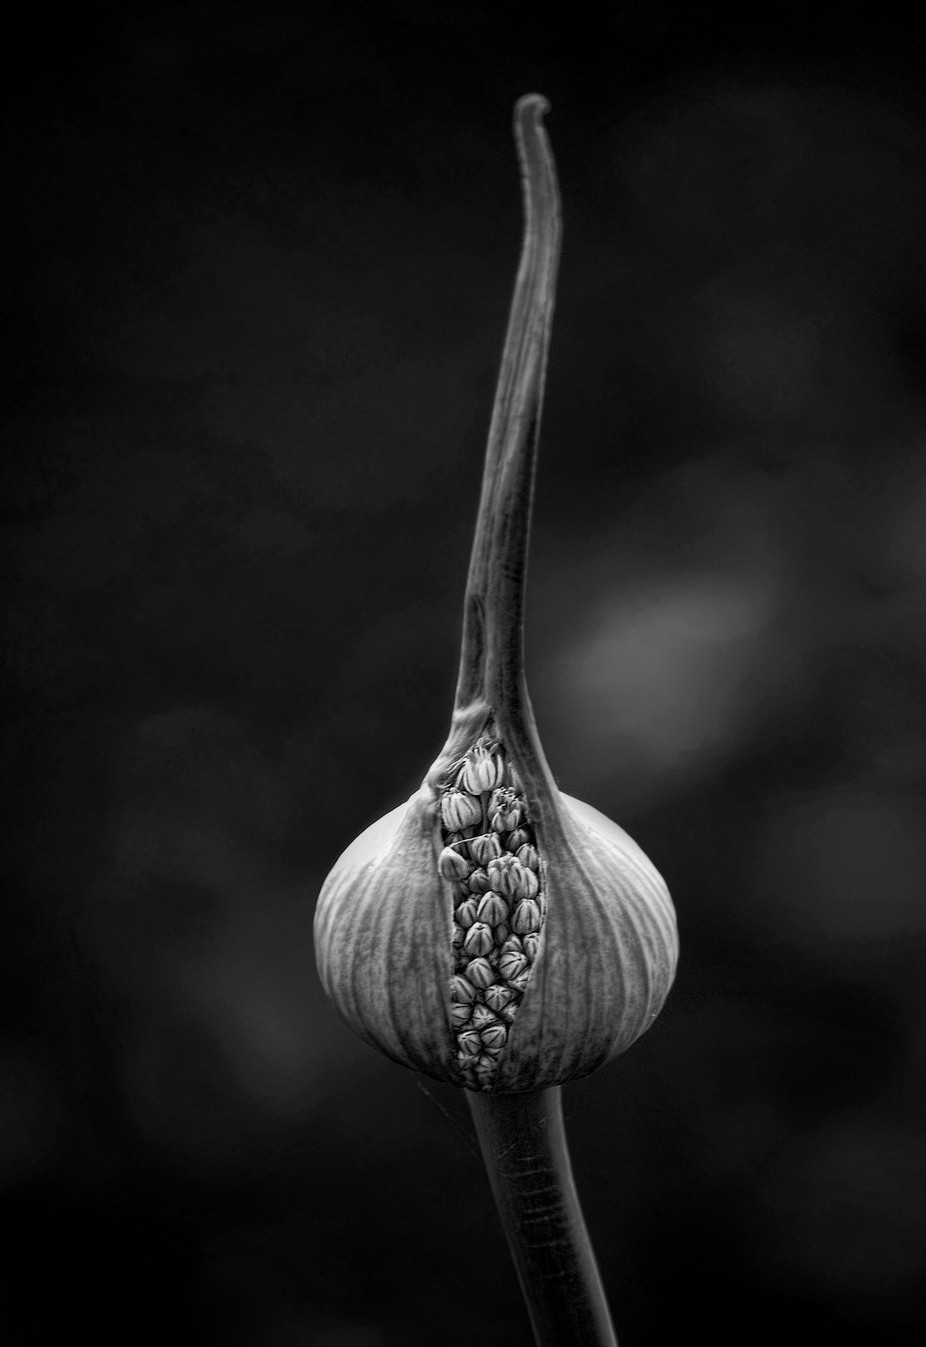 Taken a leek BW by Arch - Plants In Black And White Photo Contest